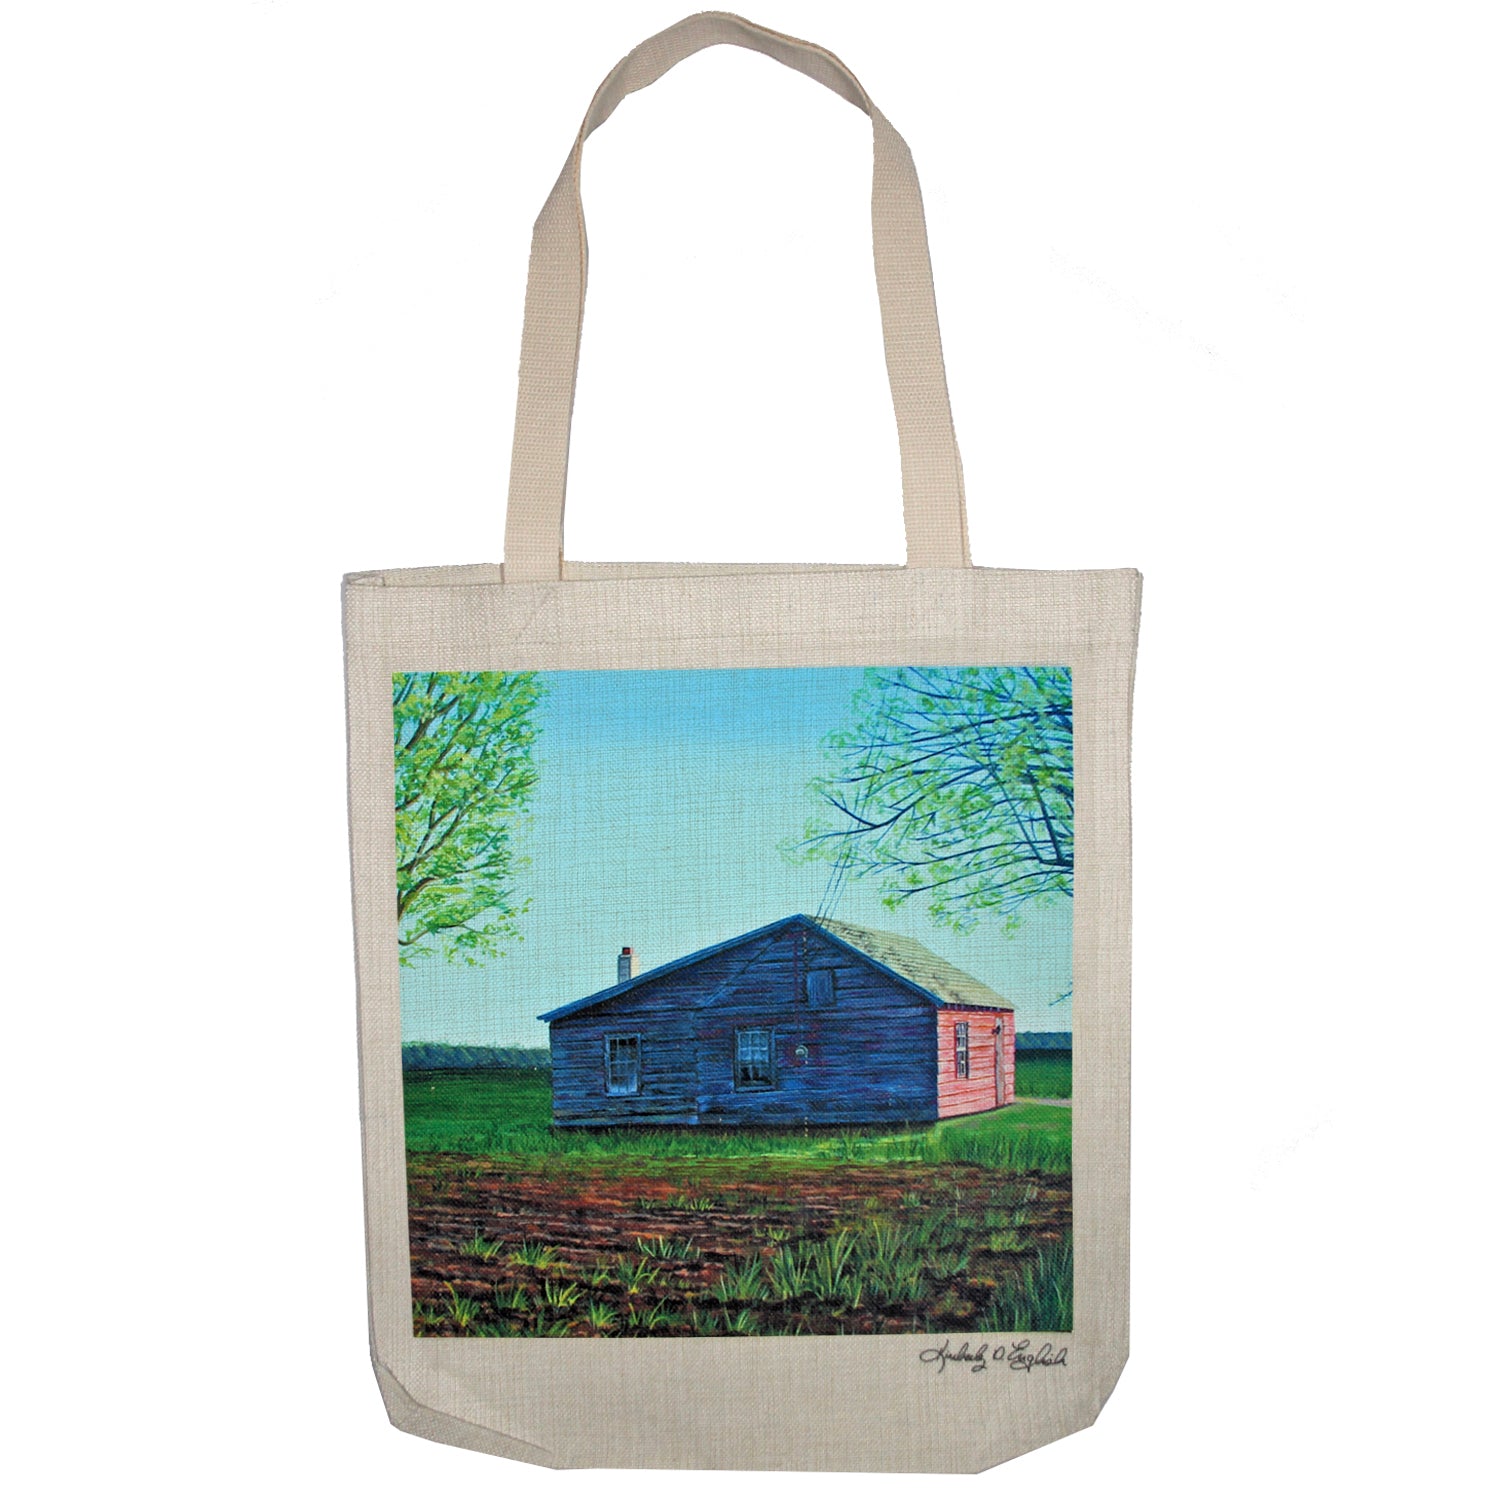 The Meathouse Tote Bag